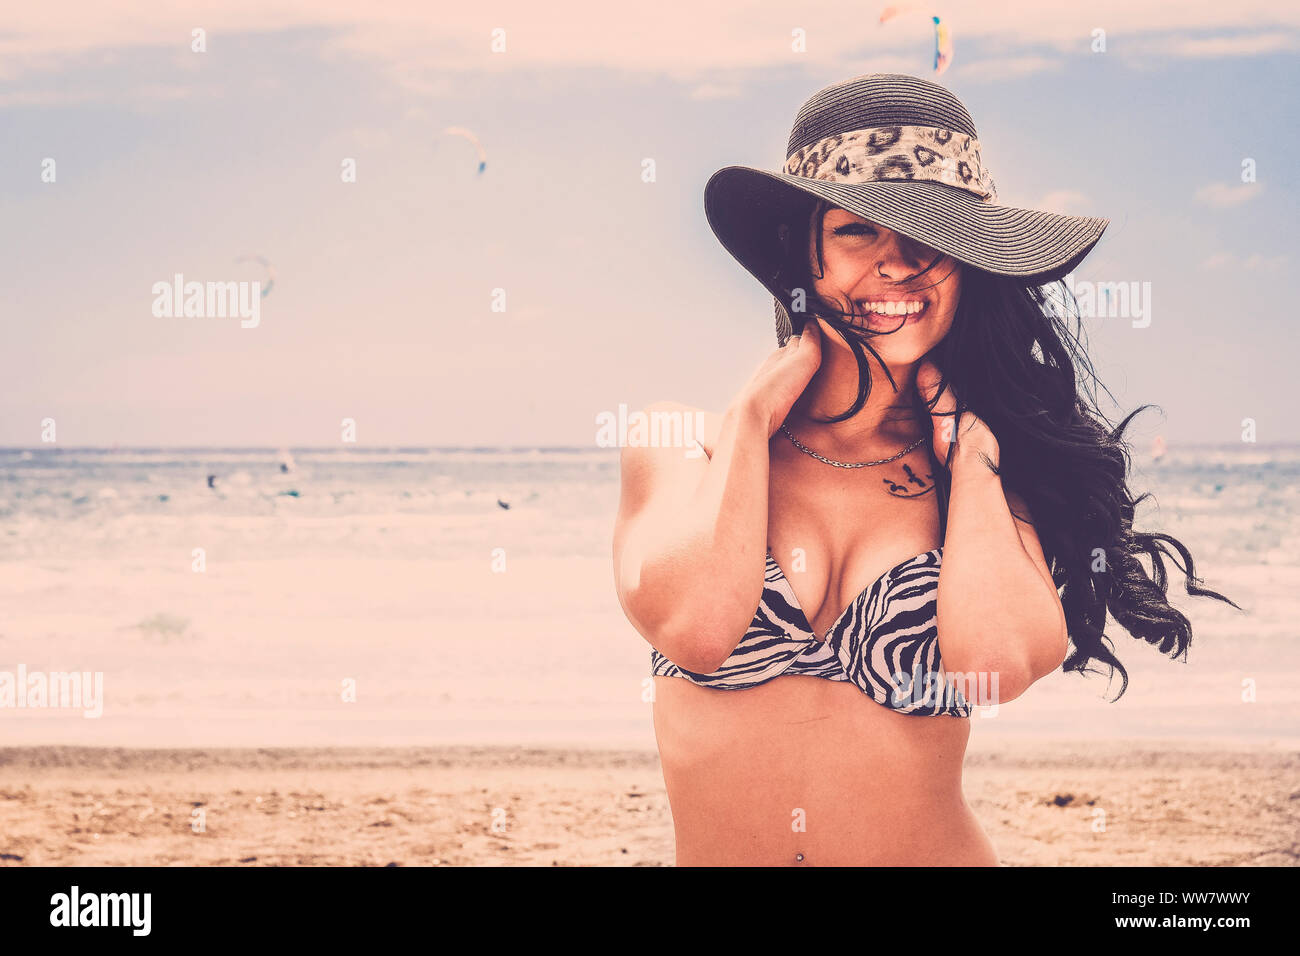 young smile beautiful woman smile at te camera on the beach in Tenerife. Long black hair touching hre shoulder back. Big grey hat and kitesurfers on the back. Stock Photo